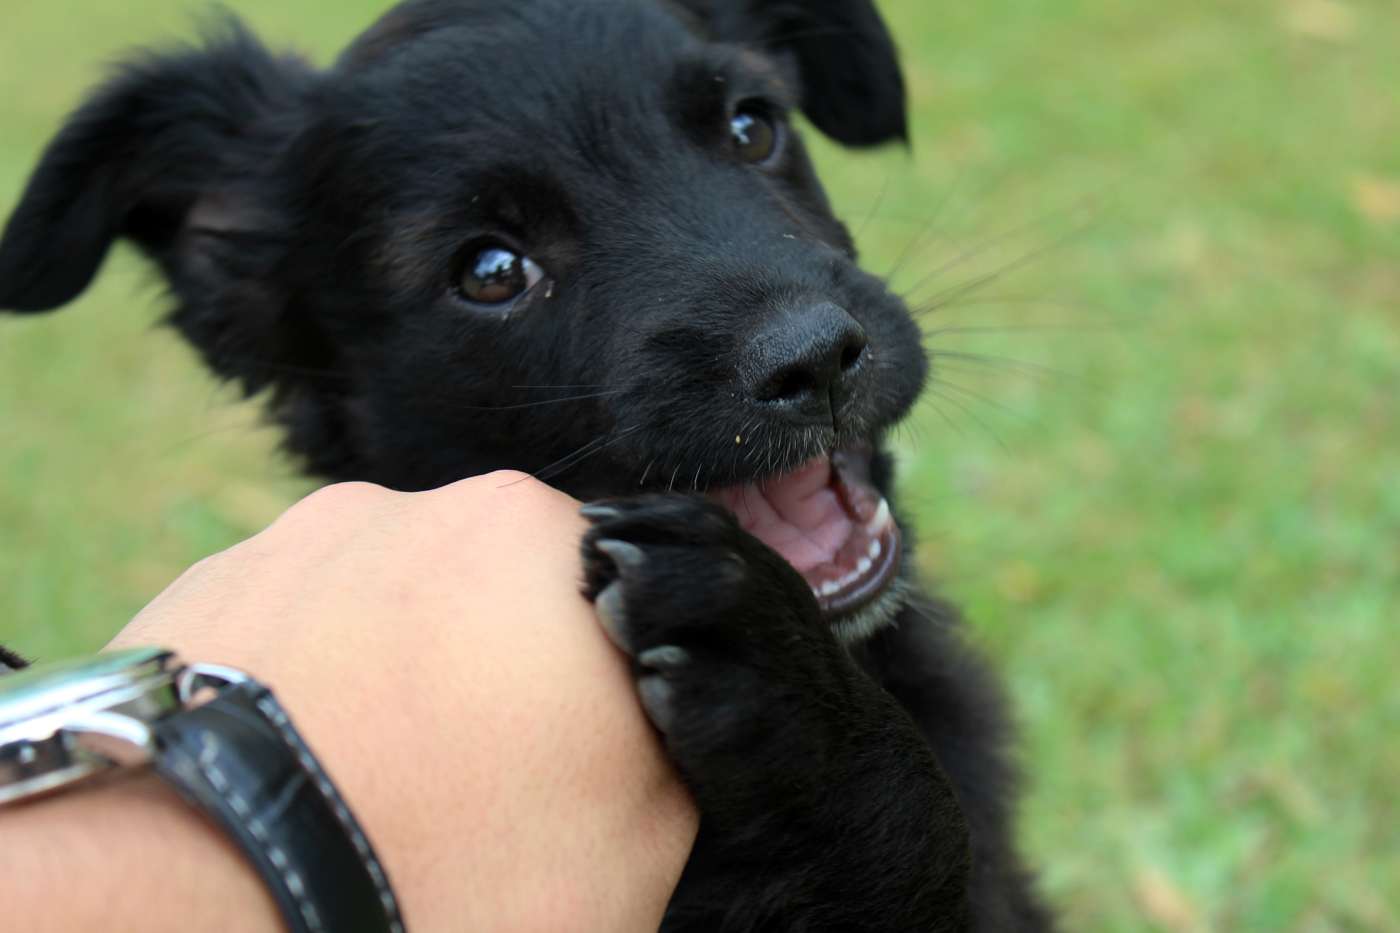 A puppy looking happy as it mouths its owners hand